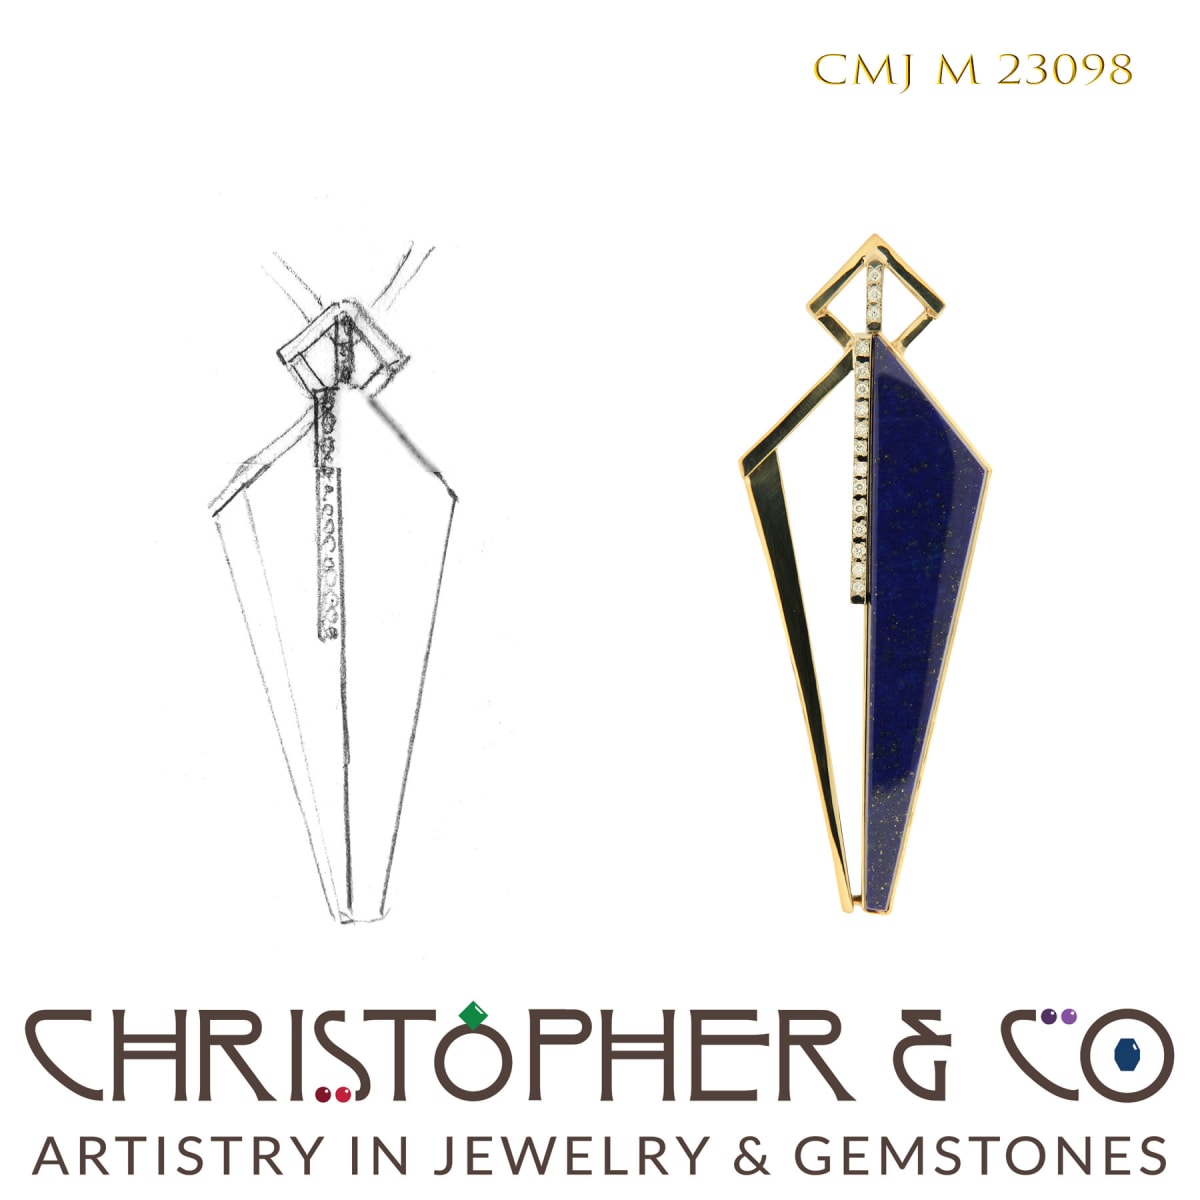 CMJ M 23098  Gold pendant by Christopher M. Jupp set with diamonds and lapis lazuli. by Christopher M. Jupp  Image: CMJ M 23098  Gold pendant by Christopher M. Jupp set with diamonds and lapis lazuli.